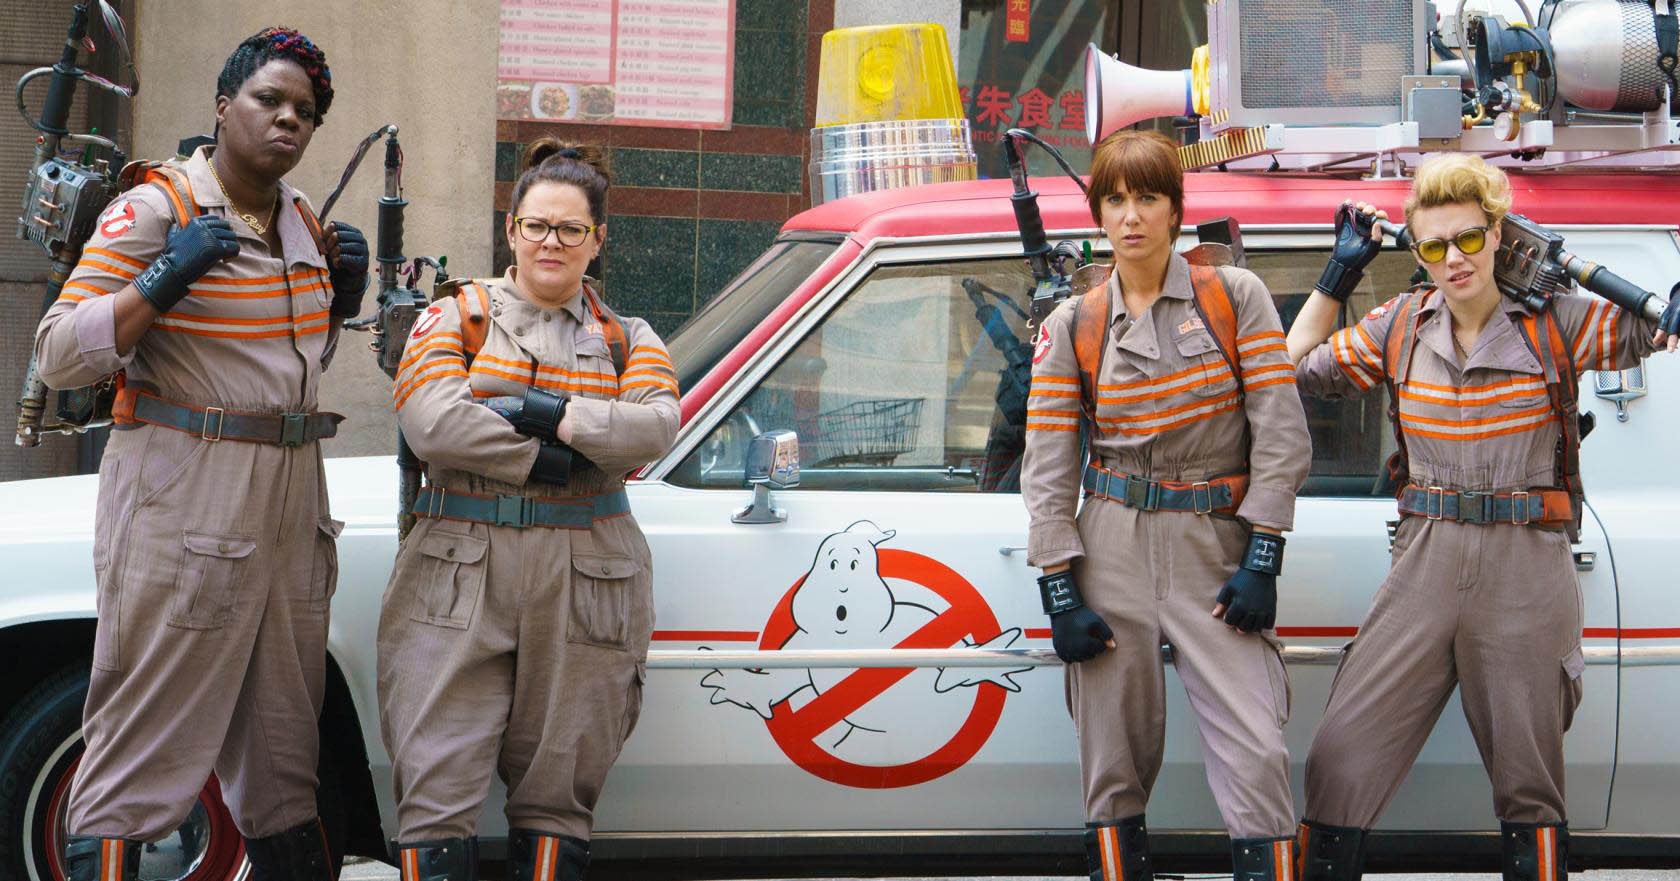 1-ghostbusters-cast-3d-movie